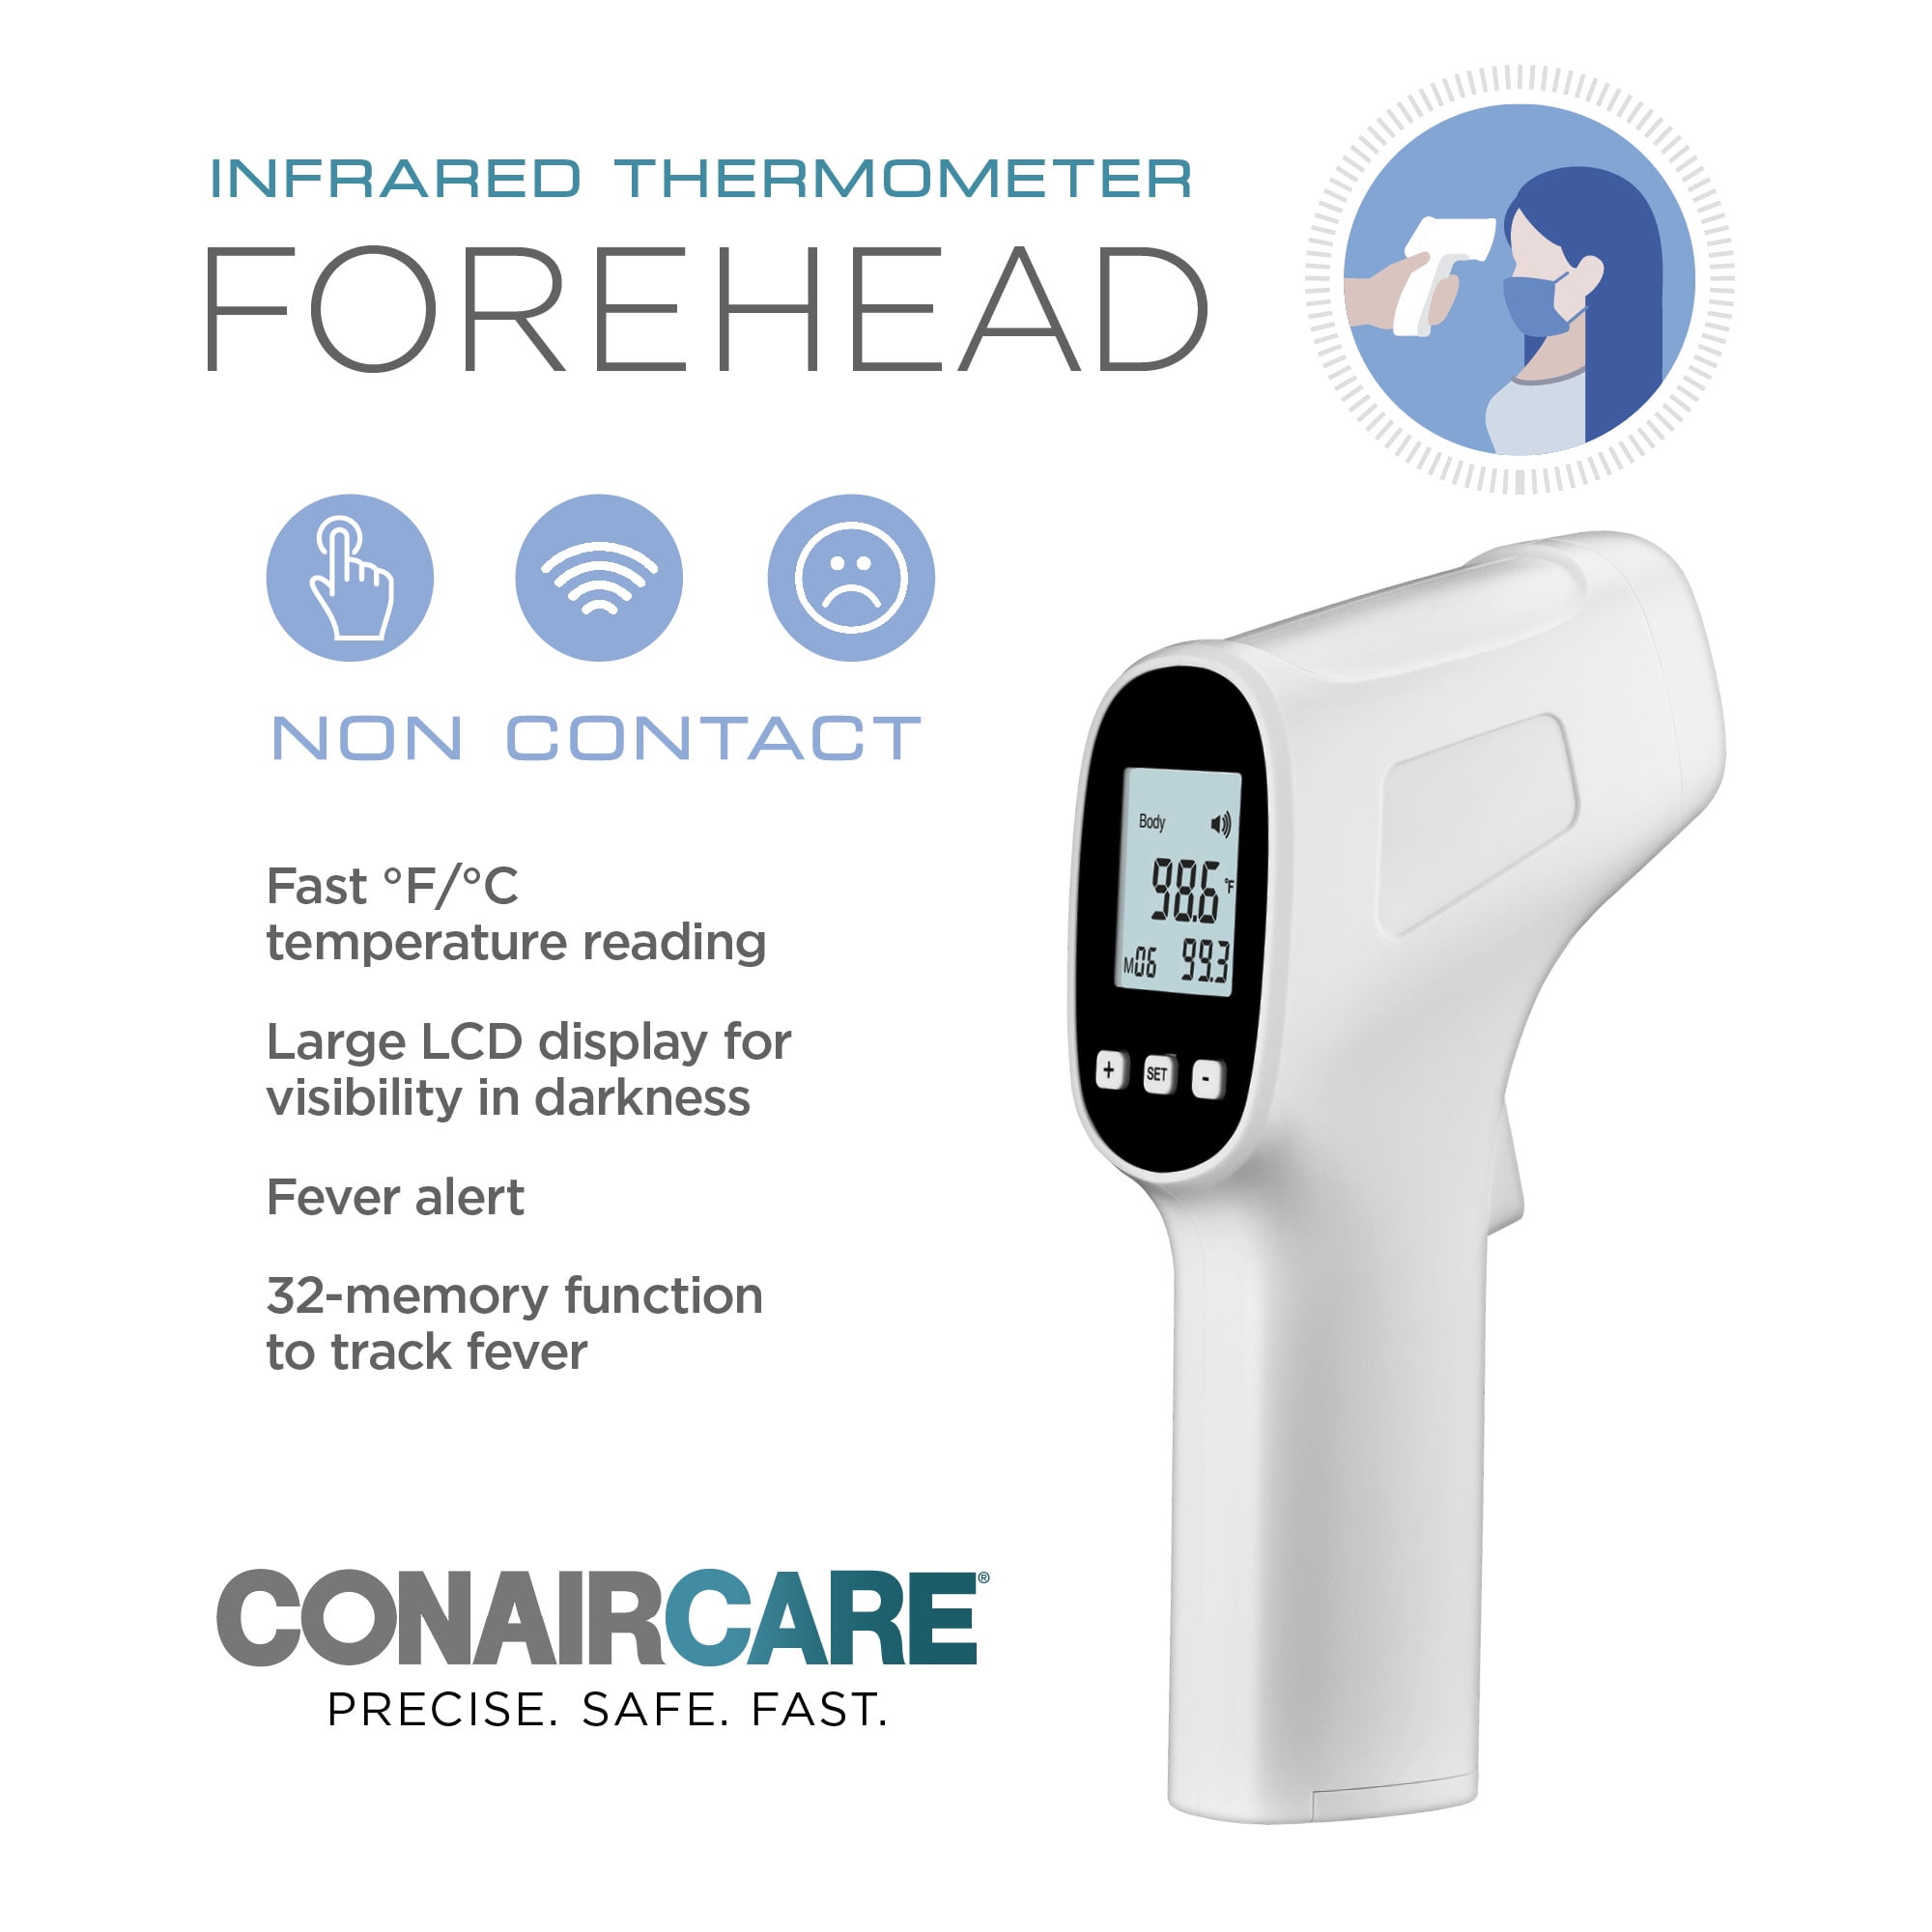 New Conaircare Infrared Forehead Thermometer ITH93 